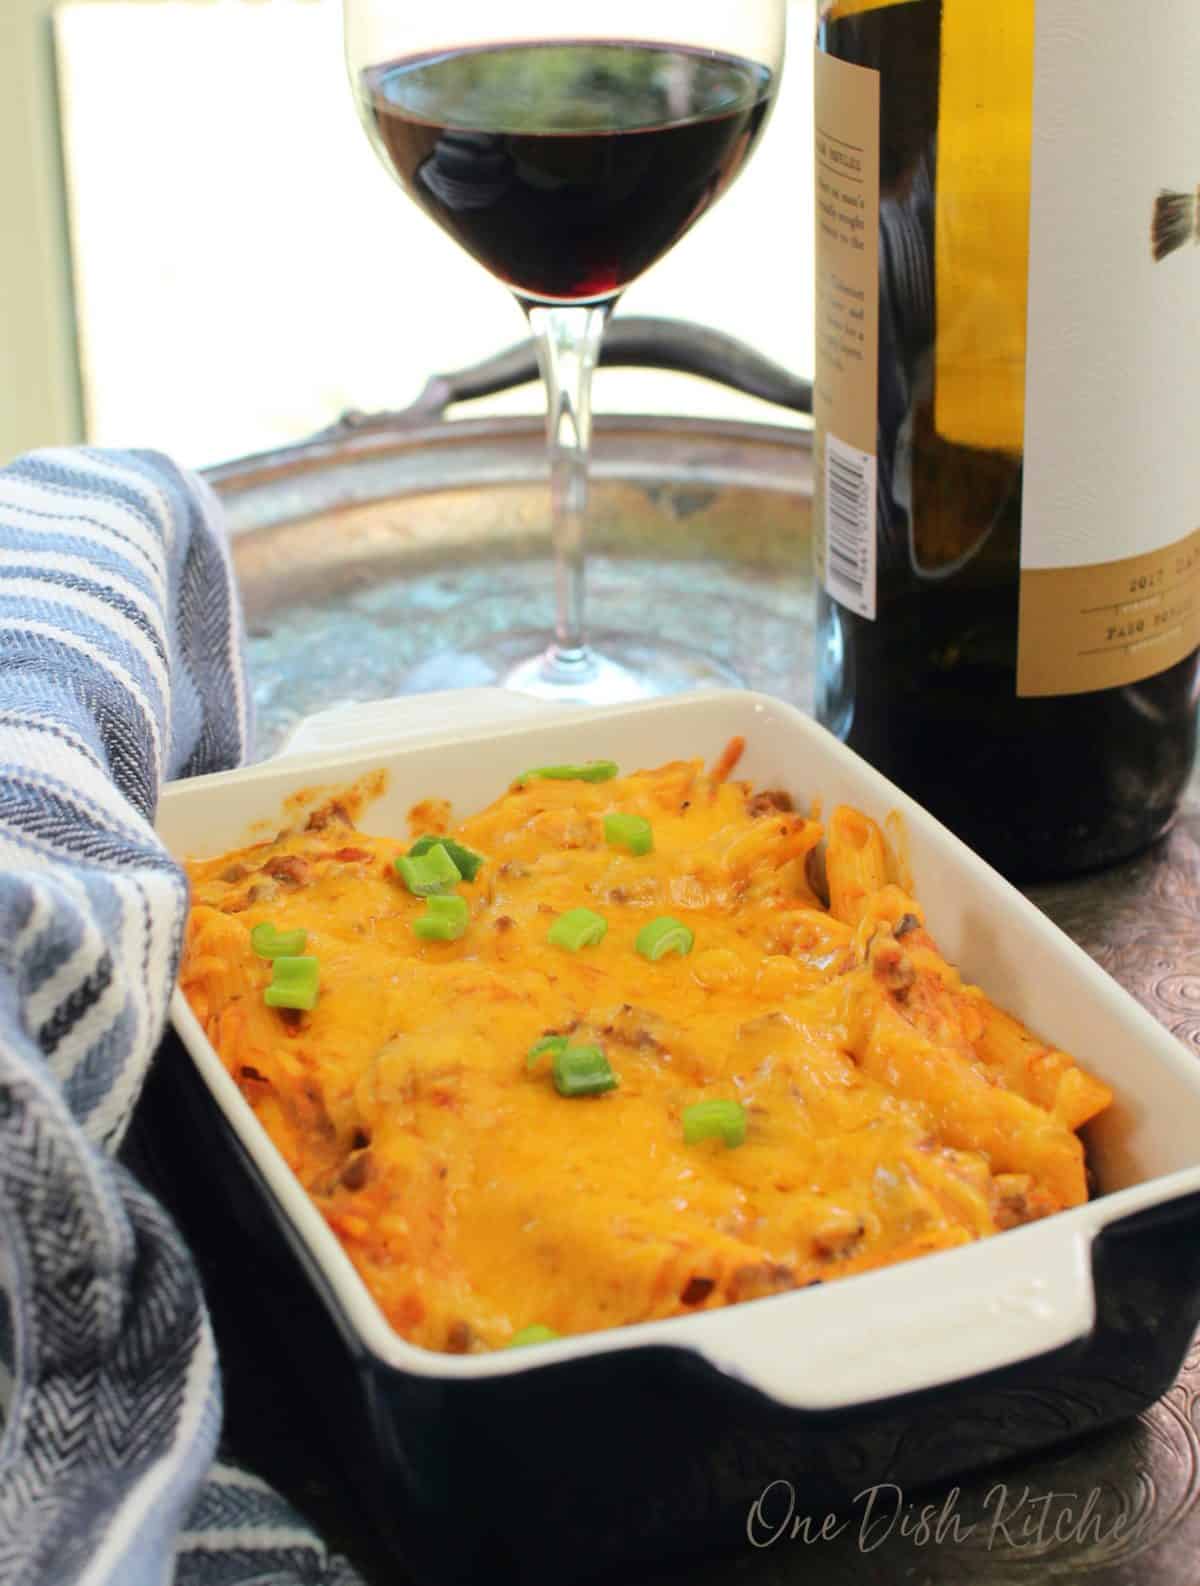 A single serving hamburger casserole in a blue baking dish next to a glass of red wine.